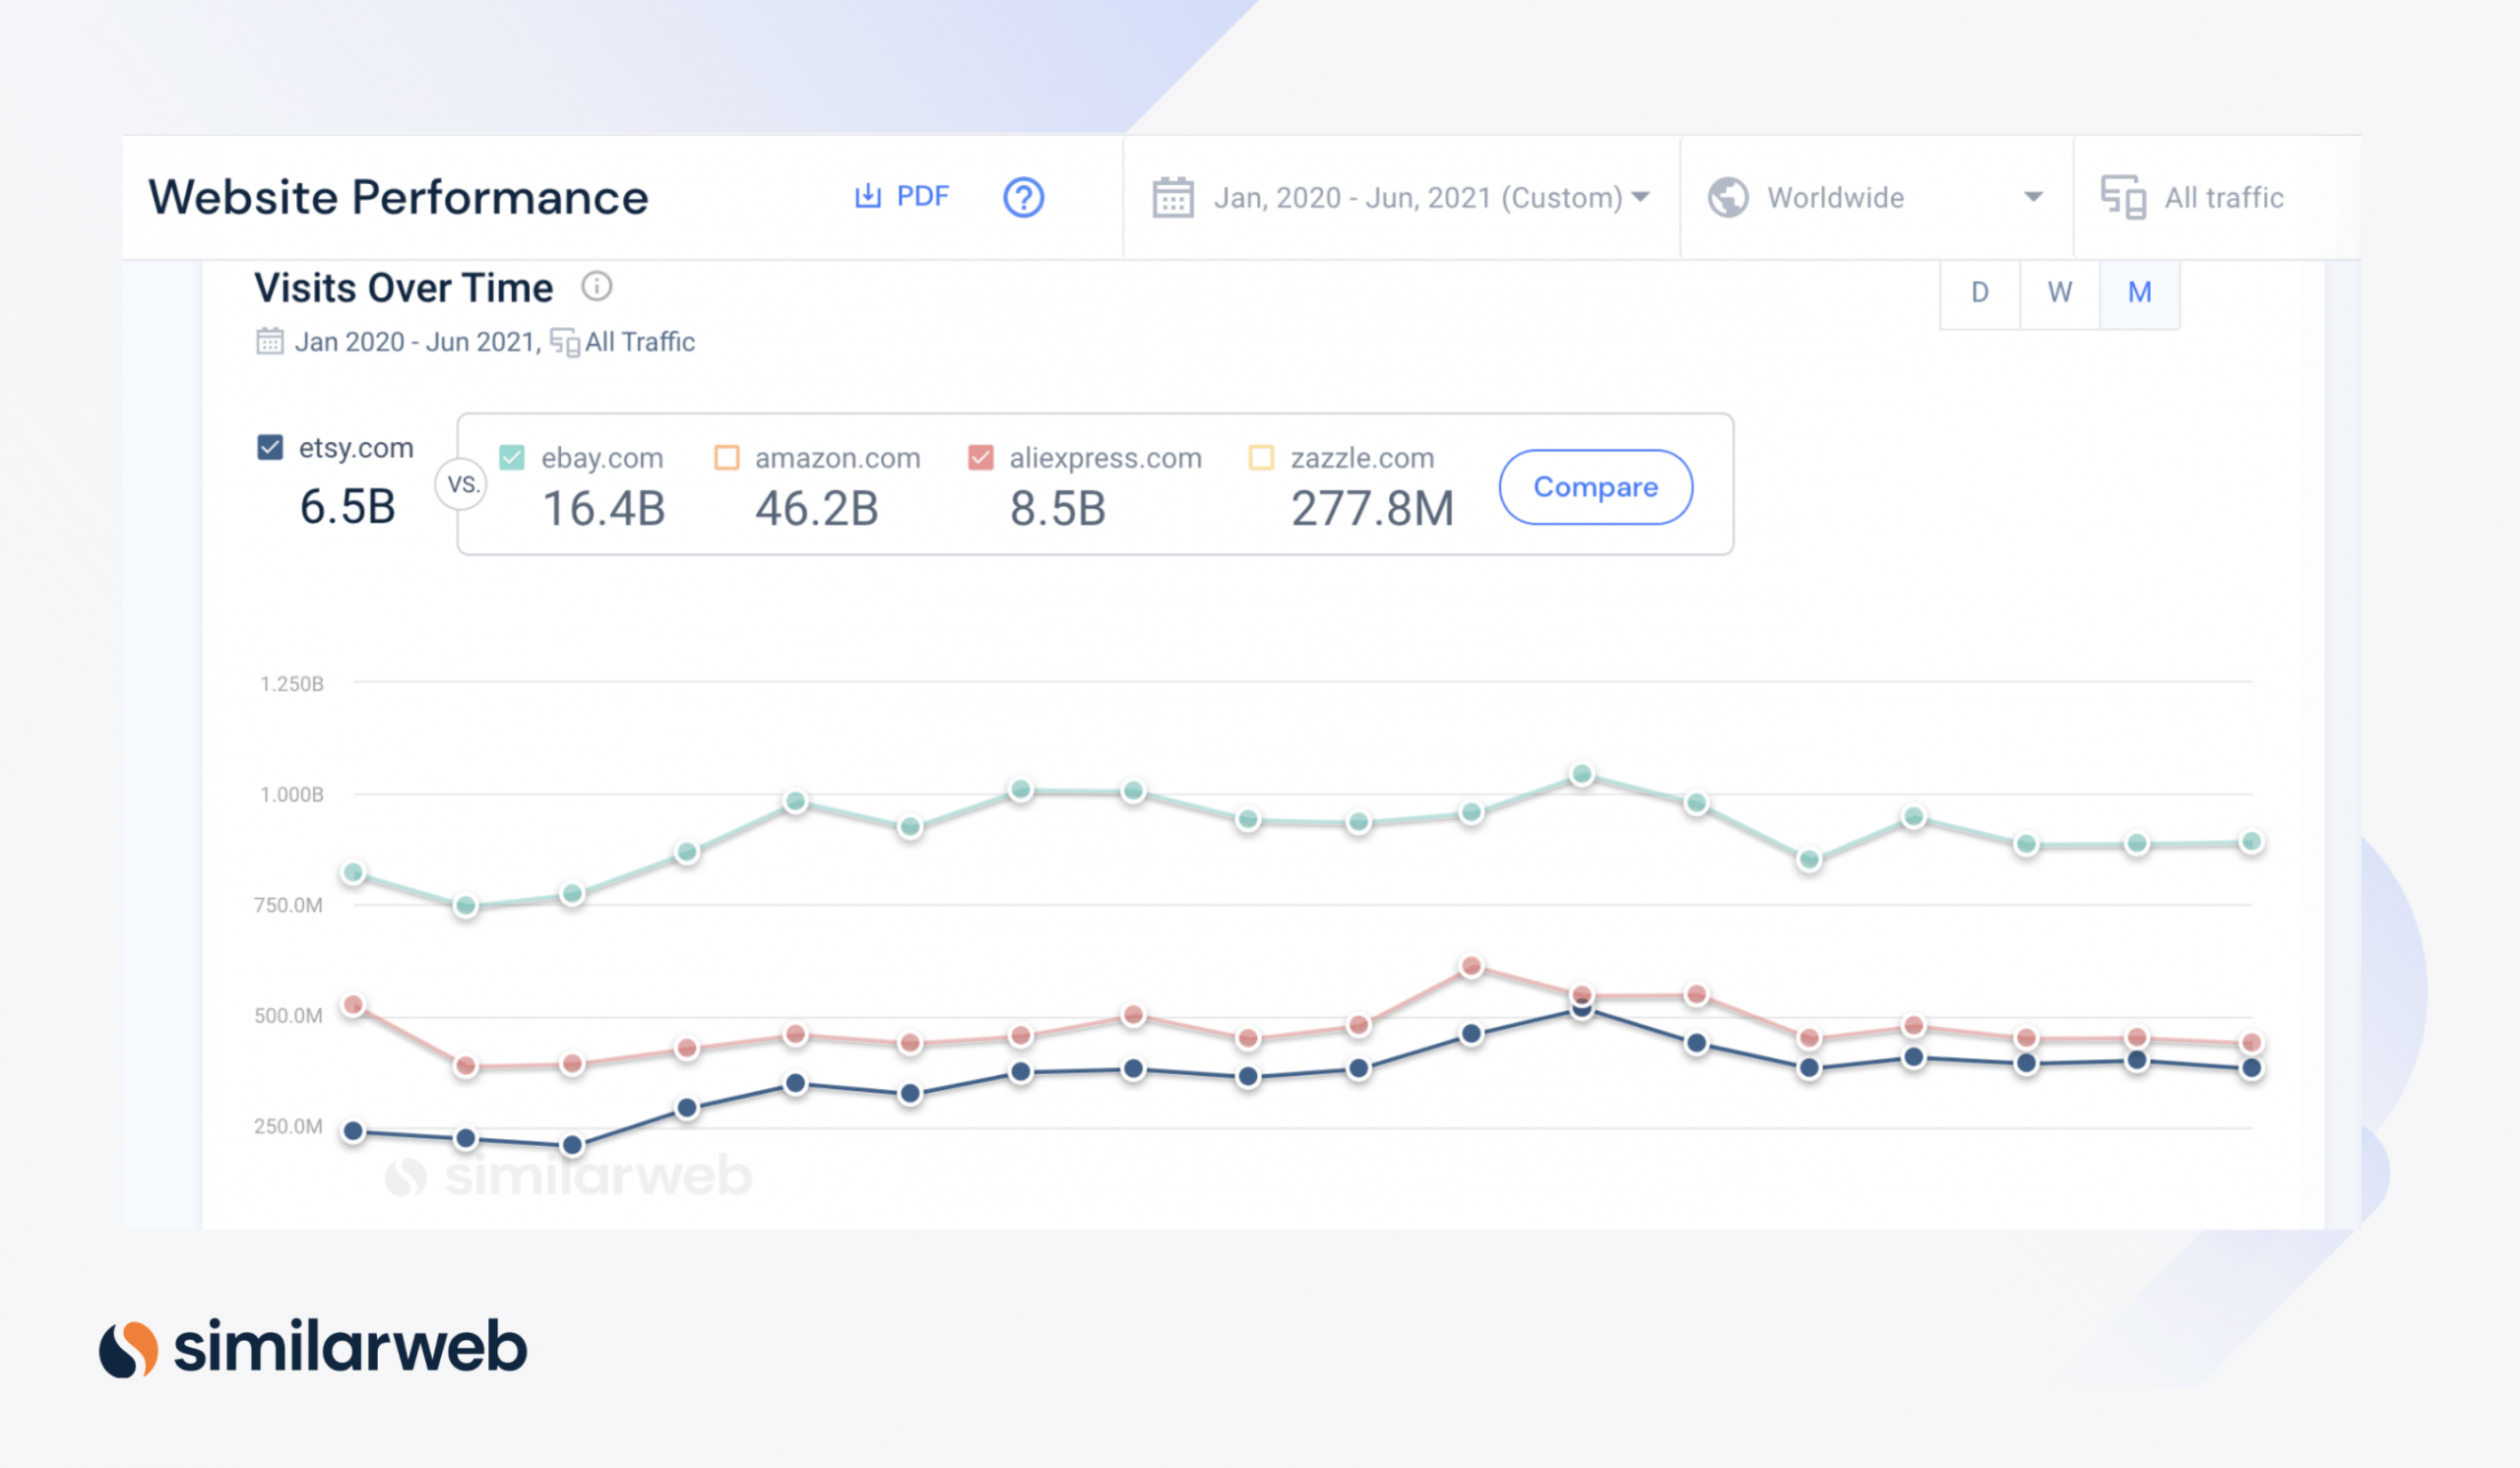 the gap between etsy.com and aliexpress.com global web visits has narrowed over time